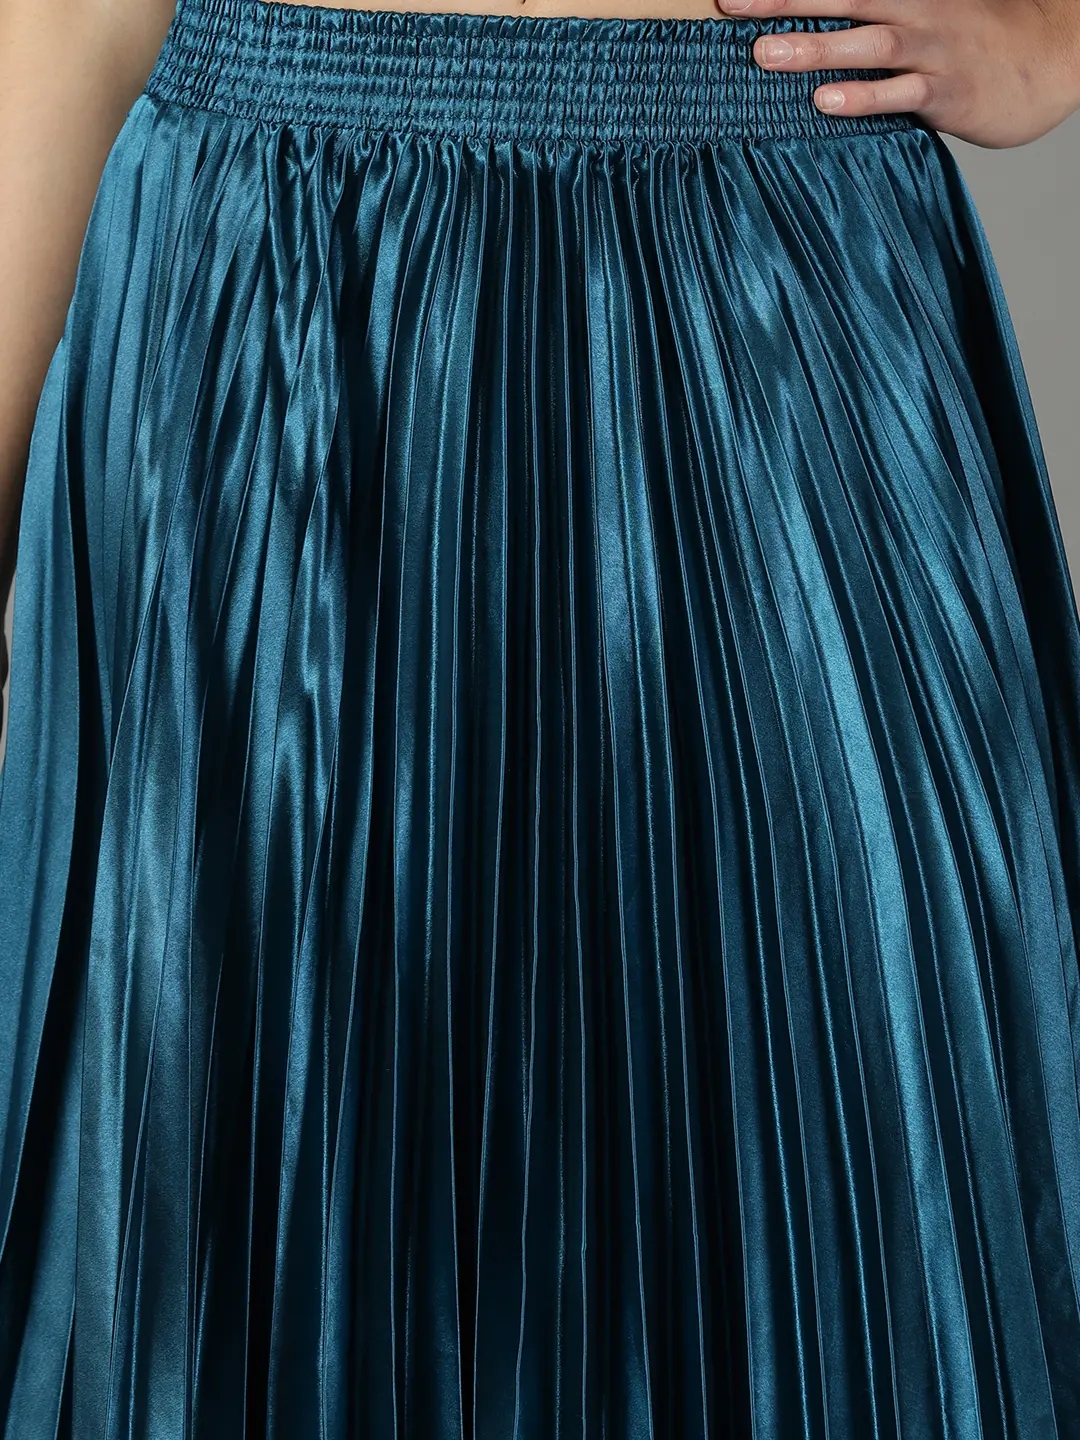 SHOWOFF Women's Solid Teal Satin Flared Skirt